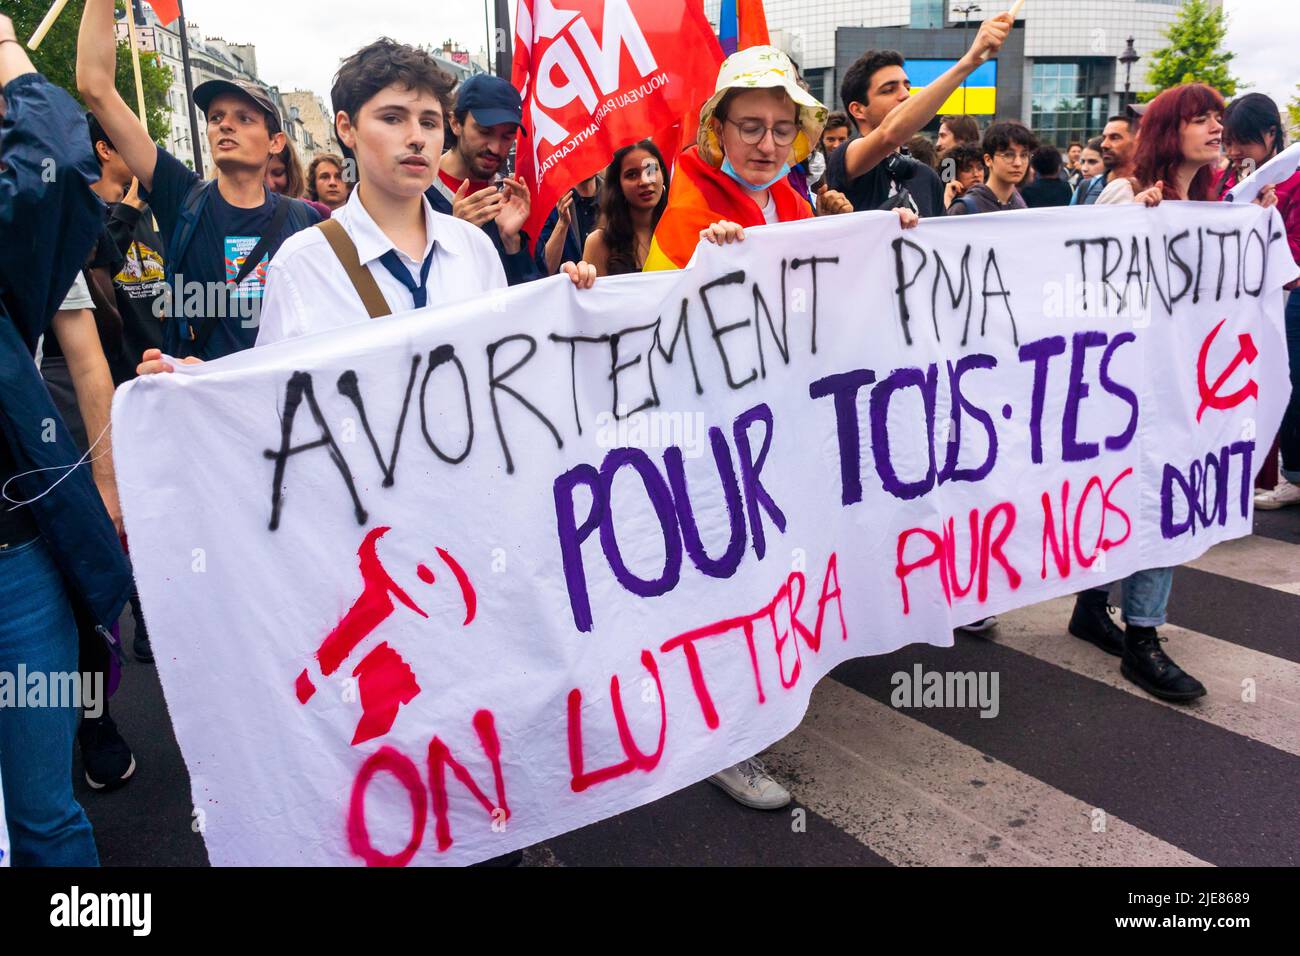 Paris, France, Crowd Feminists Marching in Gay Pride/ LGBTQI March, with Protest Banner in support of Abortion and M.A.P. (Medically Assisted Procreation) female empowerment signs Stock Photo